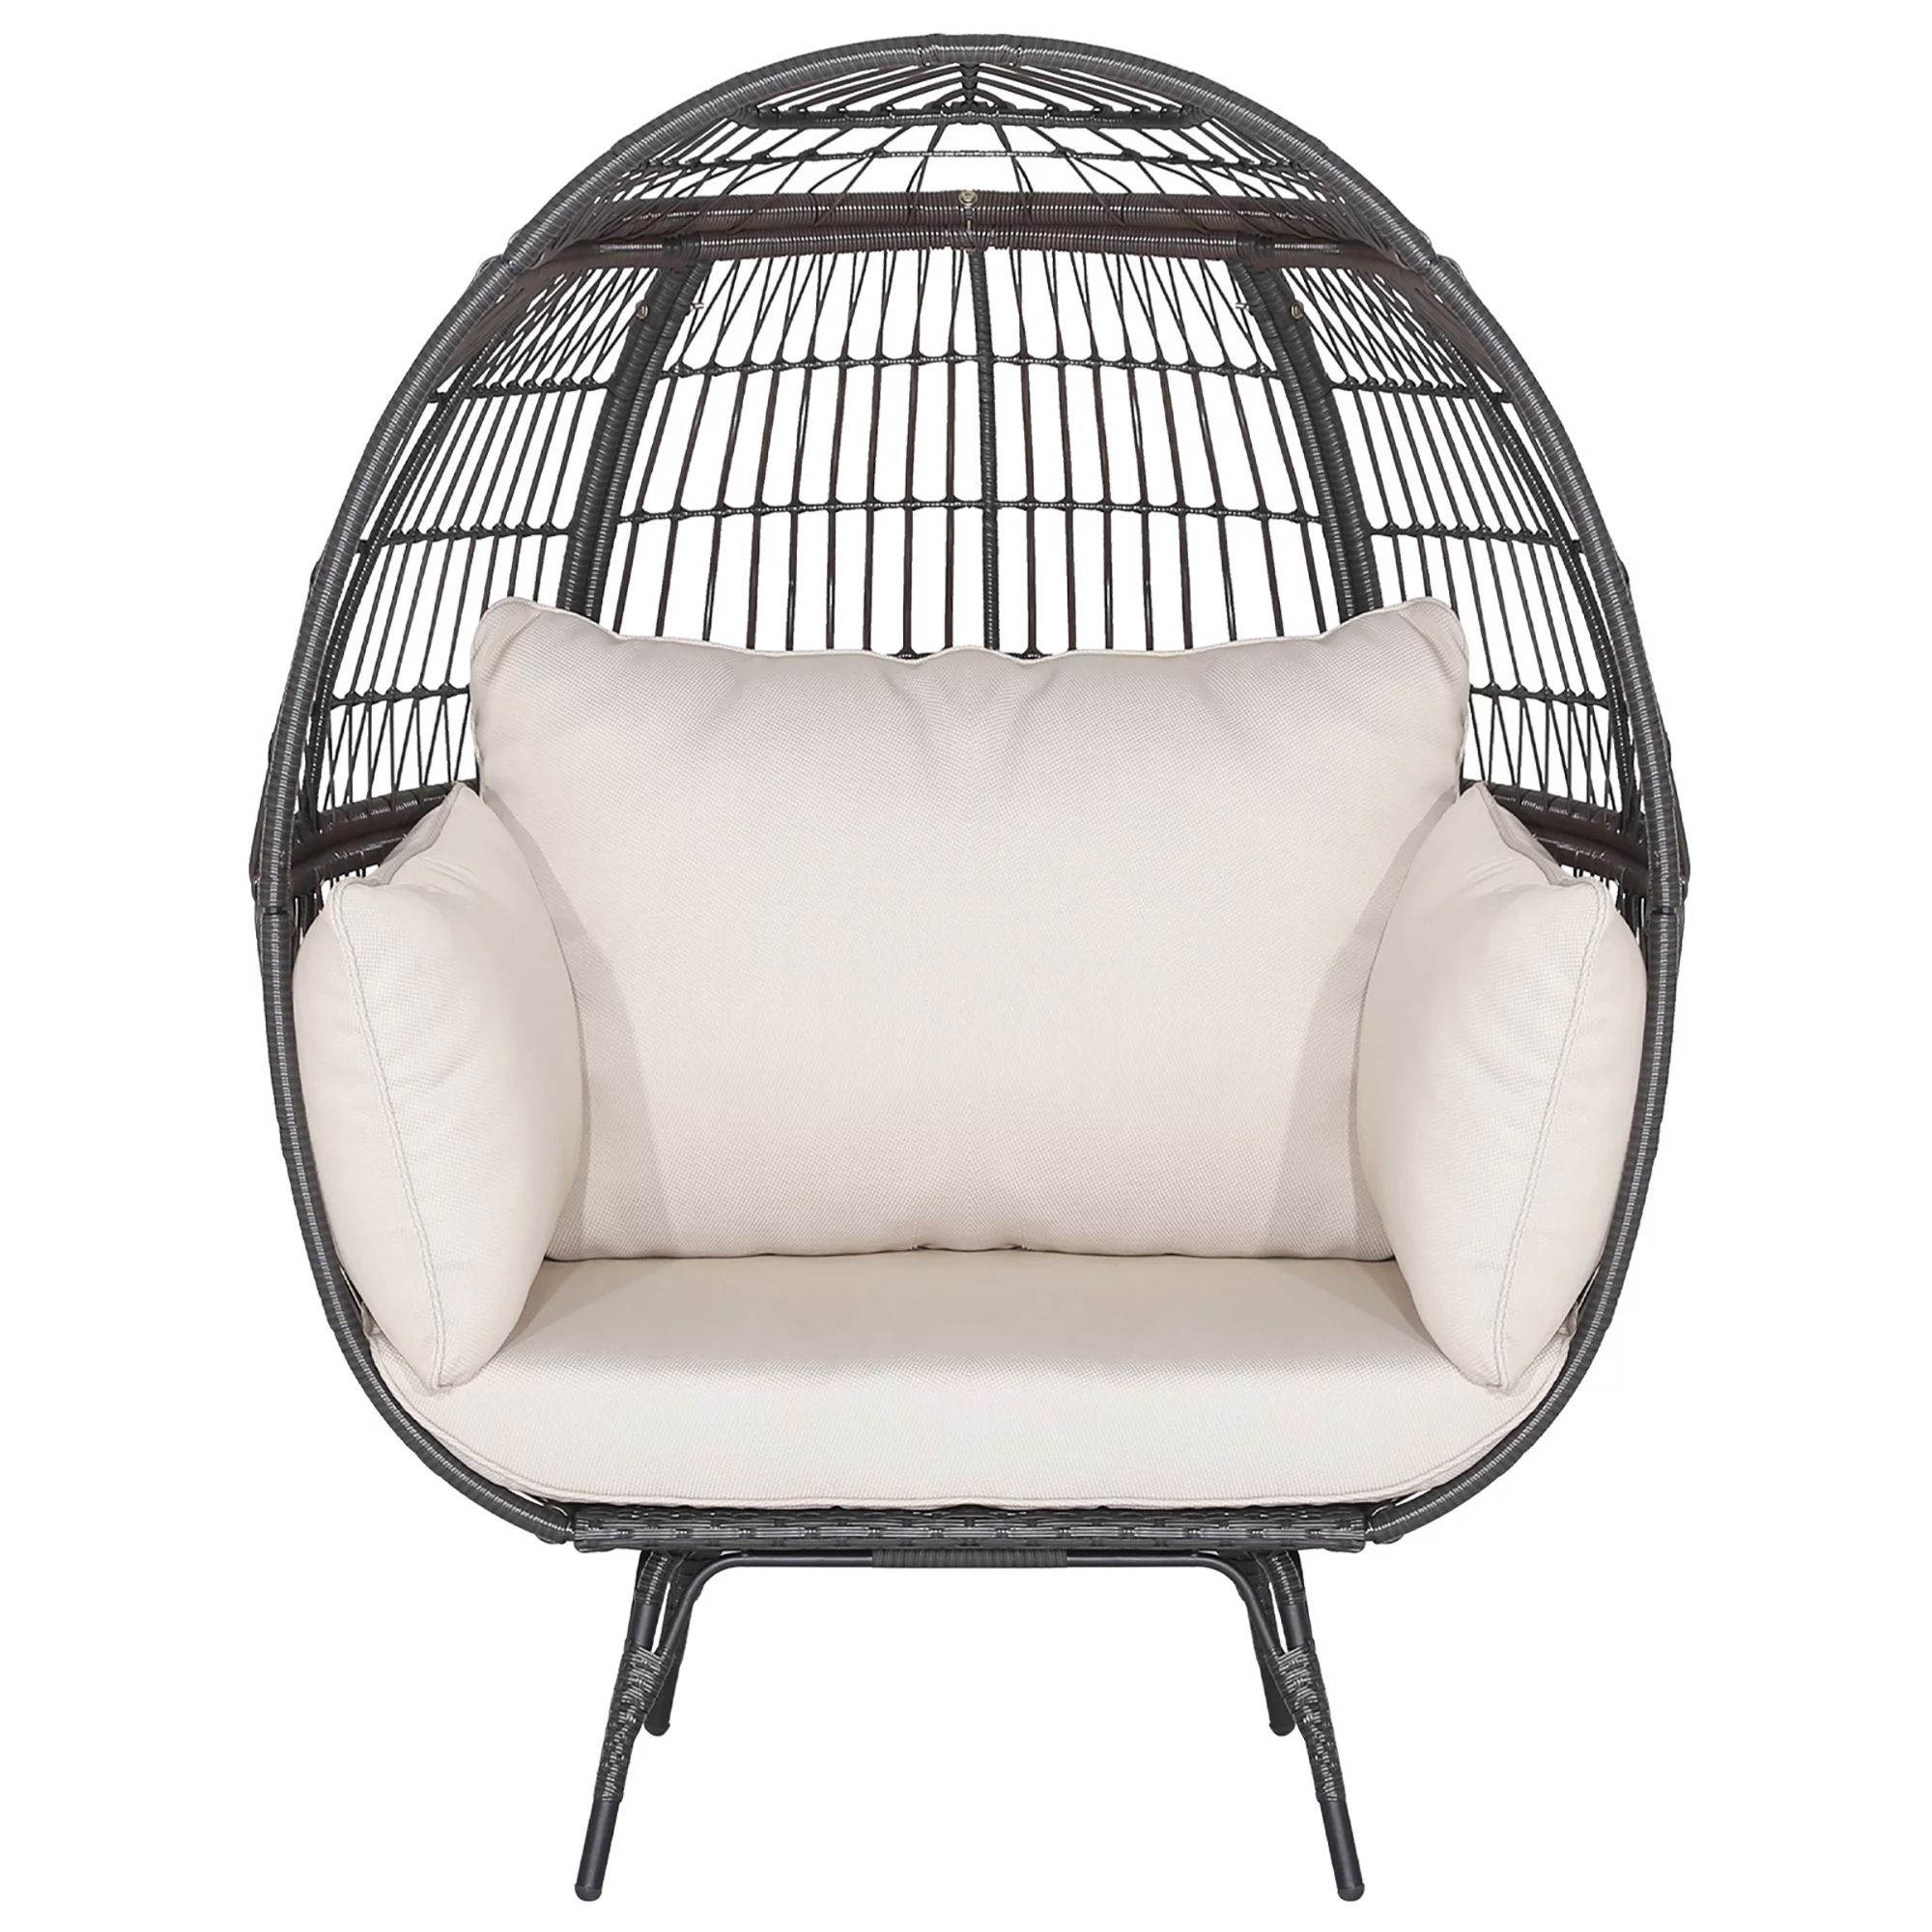 Gymax Patio Rattan Wicker Lounge Chair Oversized Outdoor Metal Frame Egg Chair w/ 4 Cushions | Walmart (US)